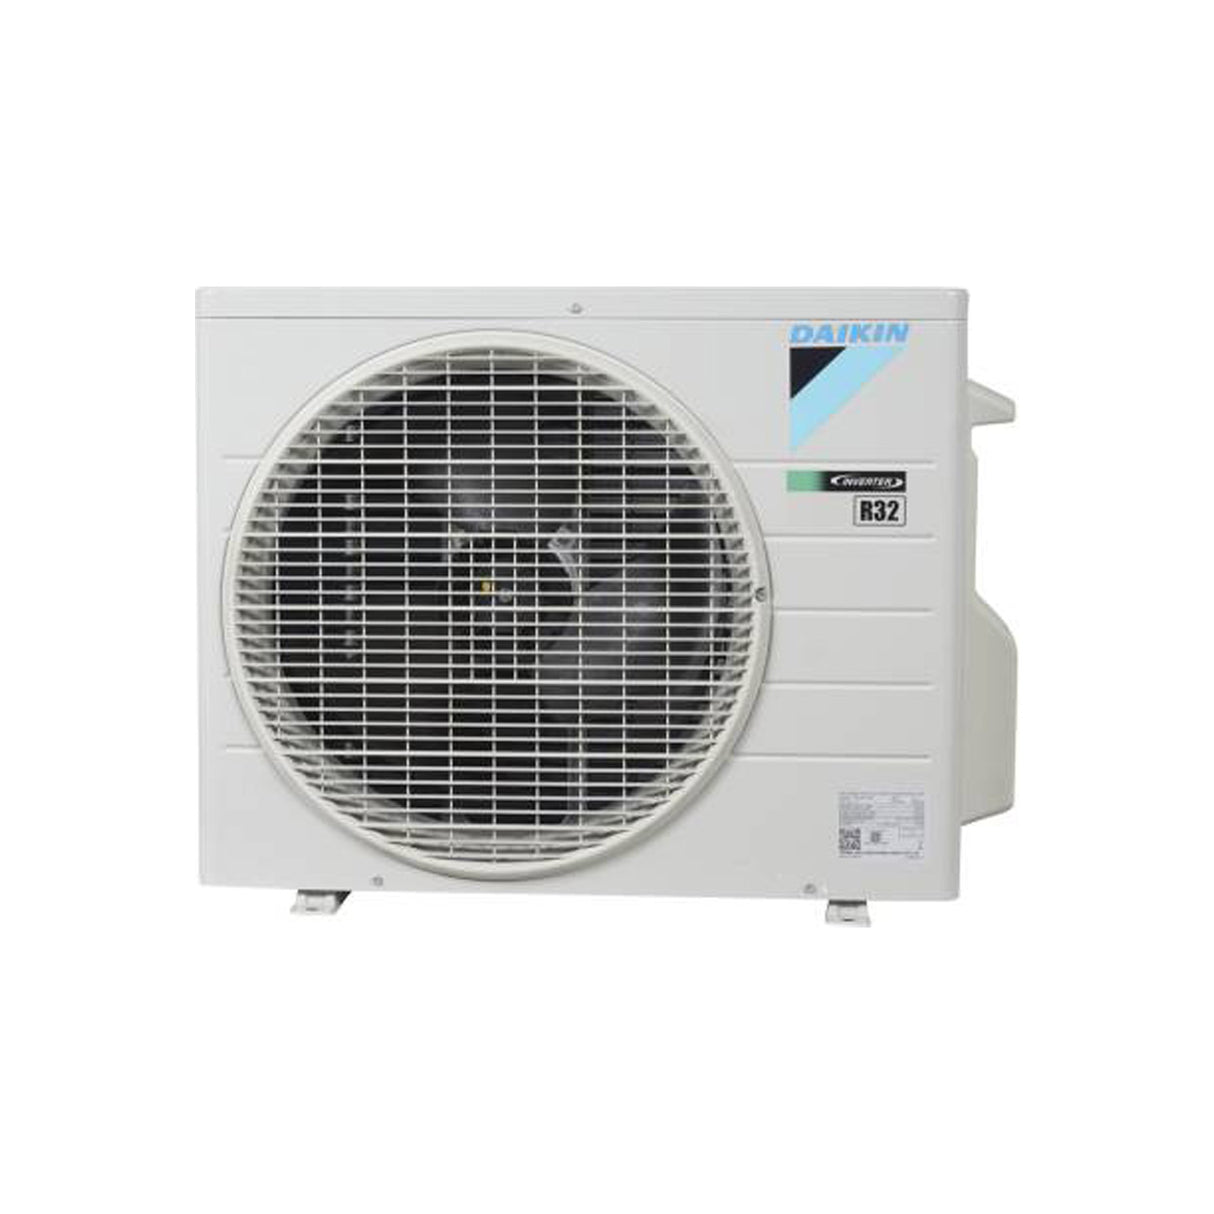 Efficient Cooling: Daikin AC - 1 Ton, 3 Star - Cool in White!